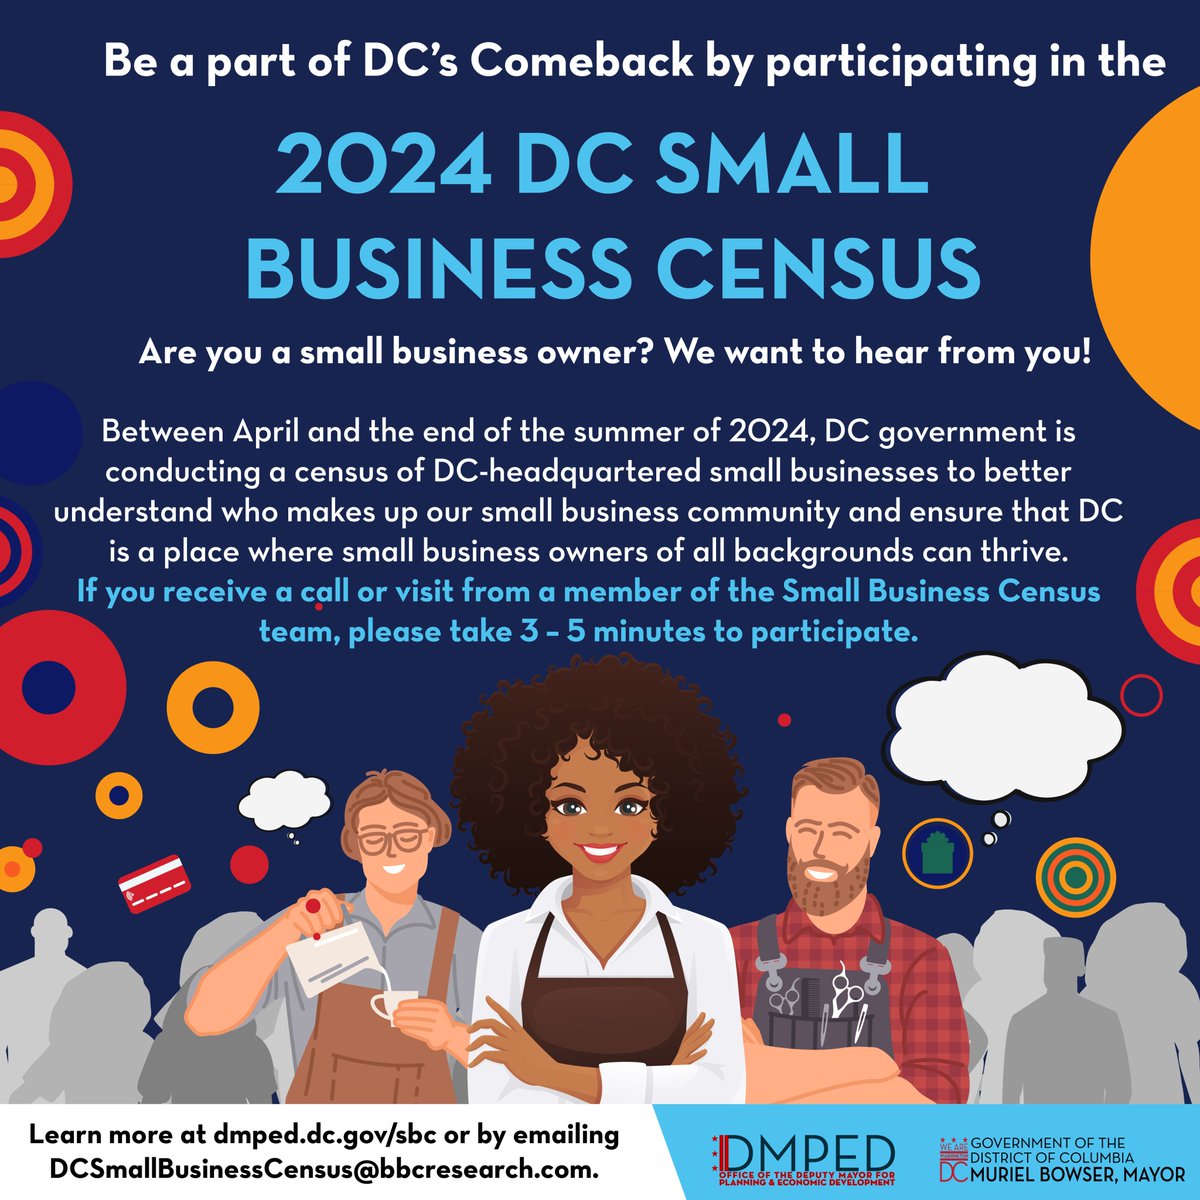 DMPED has launched our Small Business Census! We encourage all businesses to participate to get connected to District programs and supports, and to help us track @MayorBowser's goal of increasing DC's share of minority-owned businesses. Learn more at dmped.dc.gov/sbc.